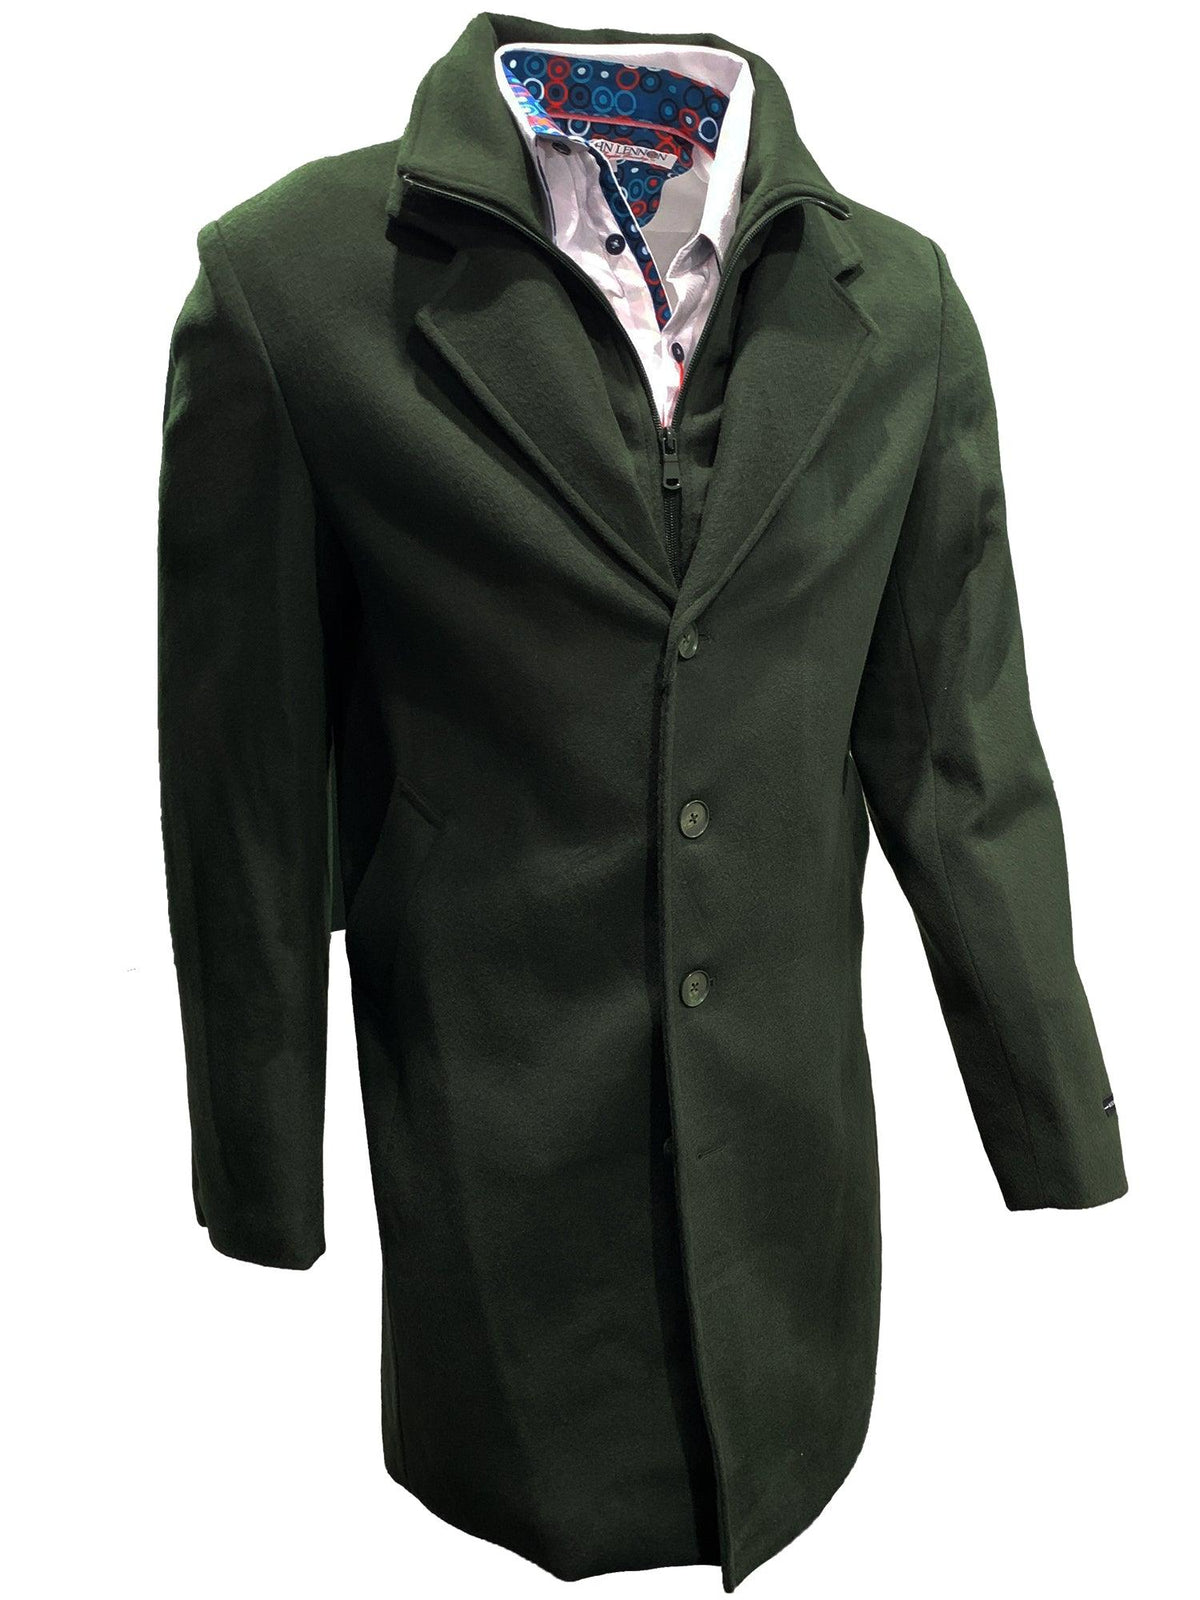 JARED REMOVABLE COLLAR COAT - Harrys for Menswear